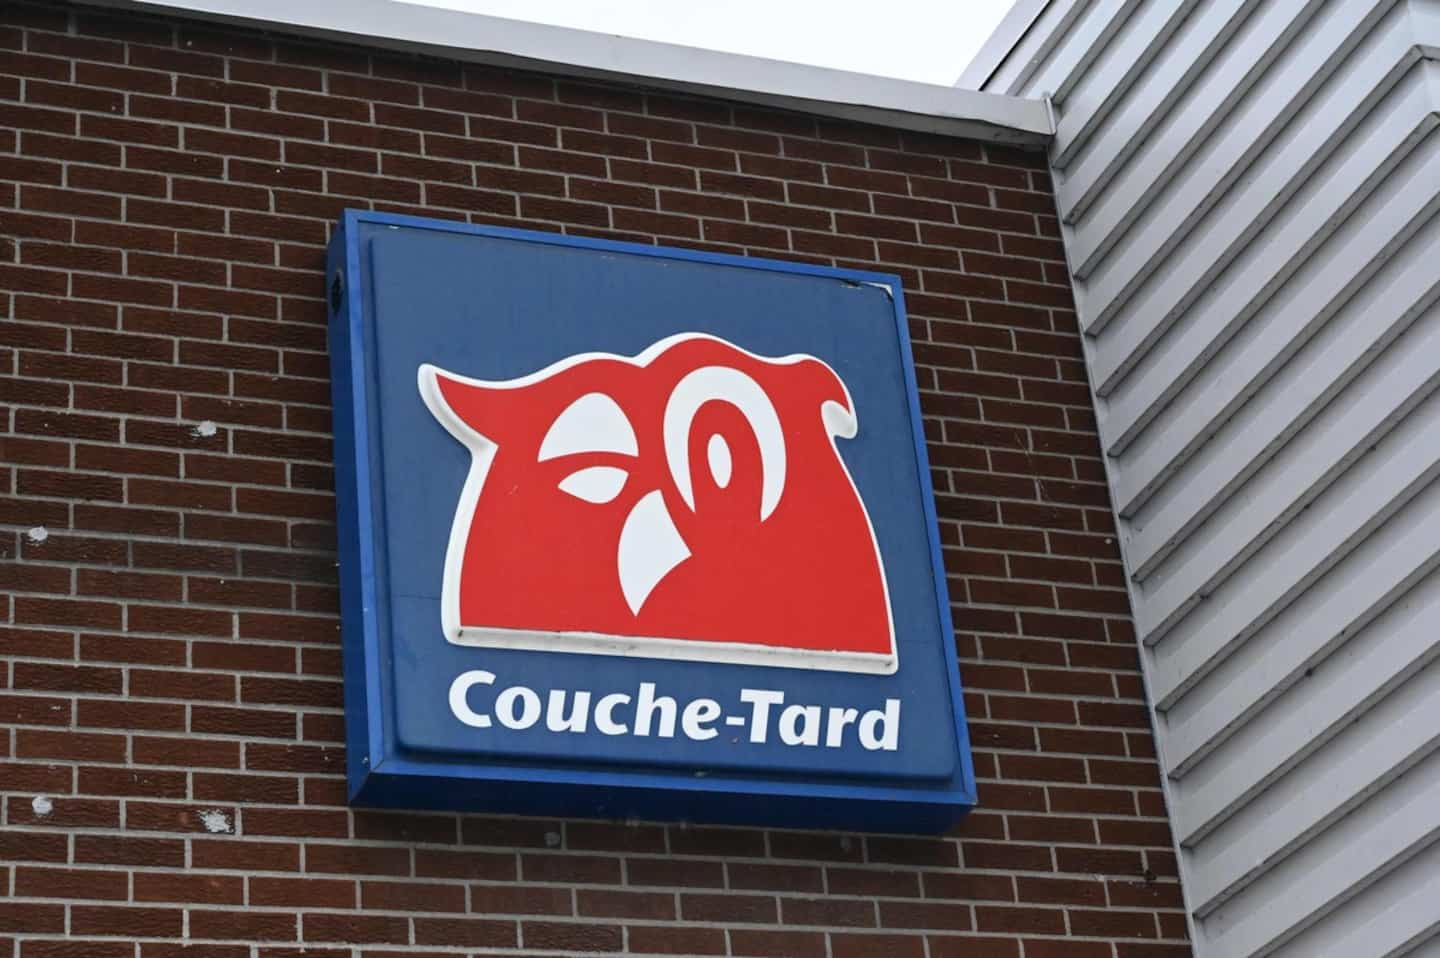 Couche-Tard will deploy 10,000 self-service checkouts within 3 years